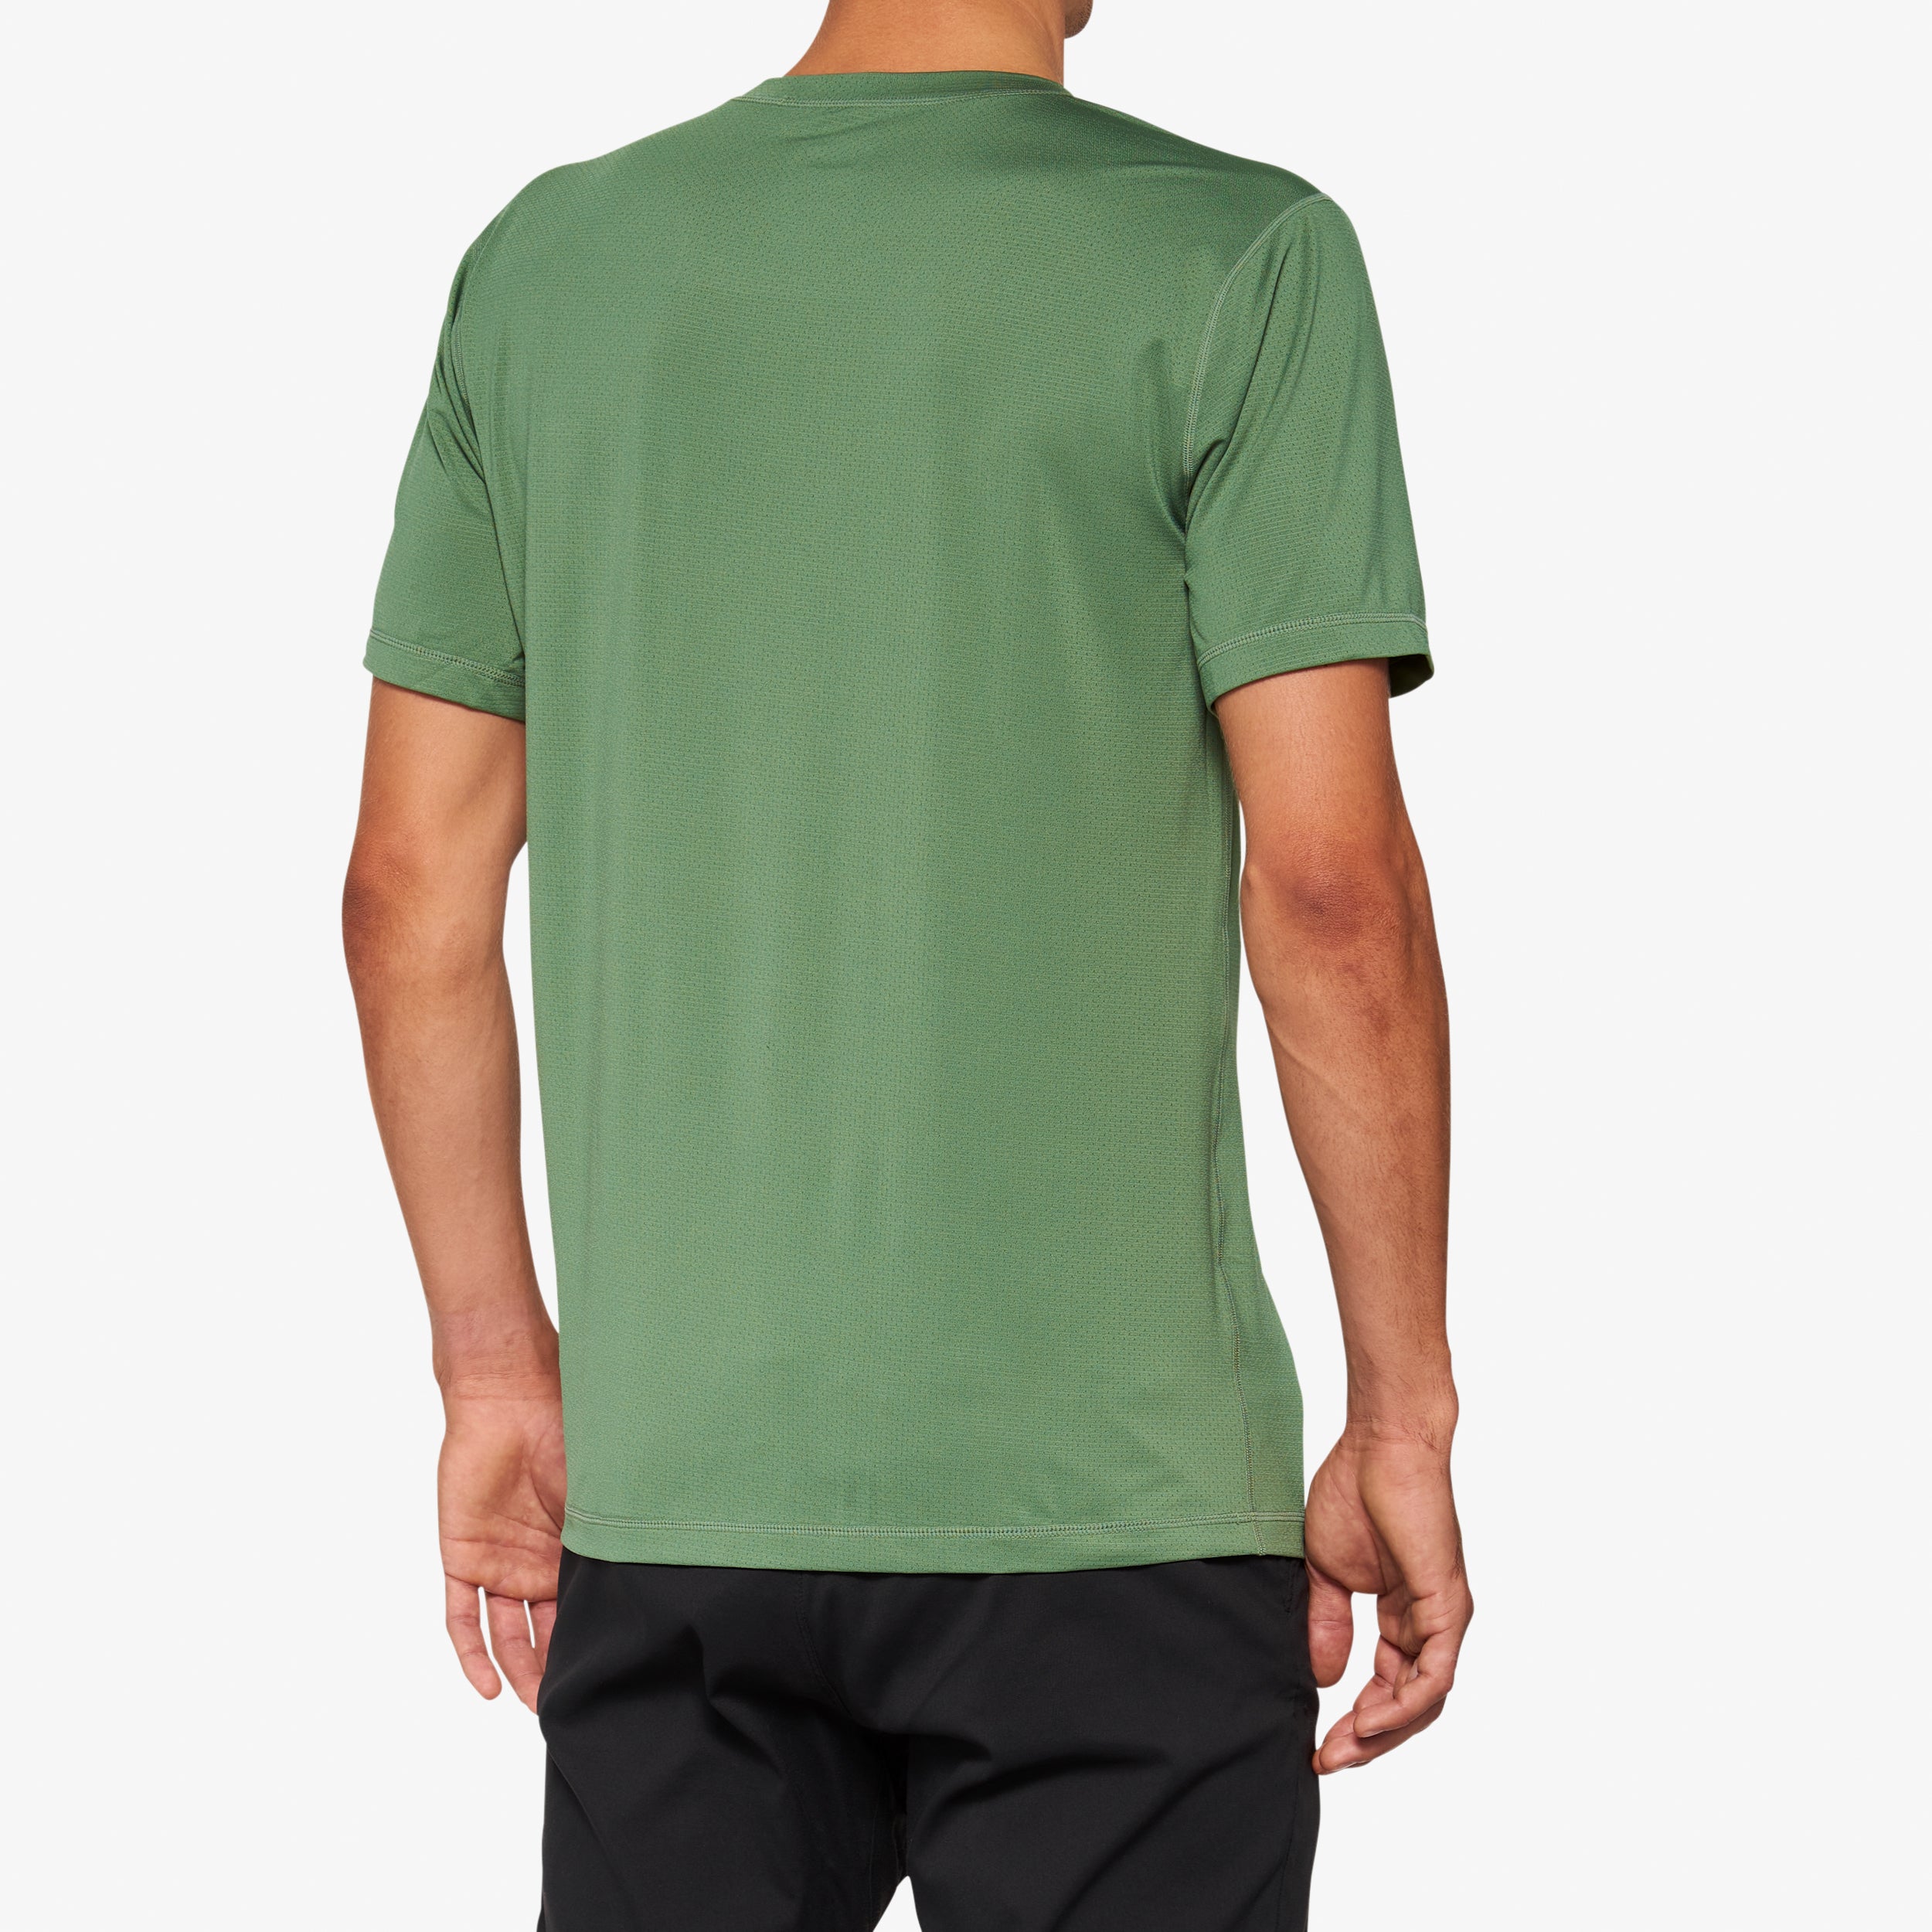 MISSION Athletic Short Sleeve Tee Olive - Secondary